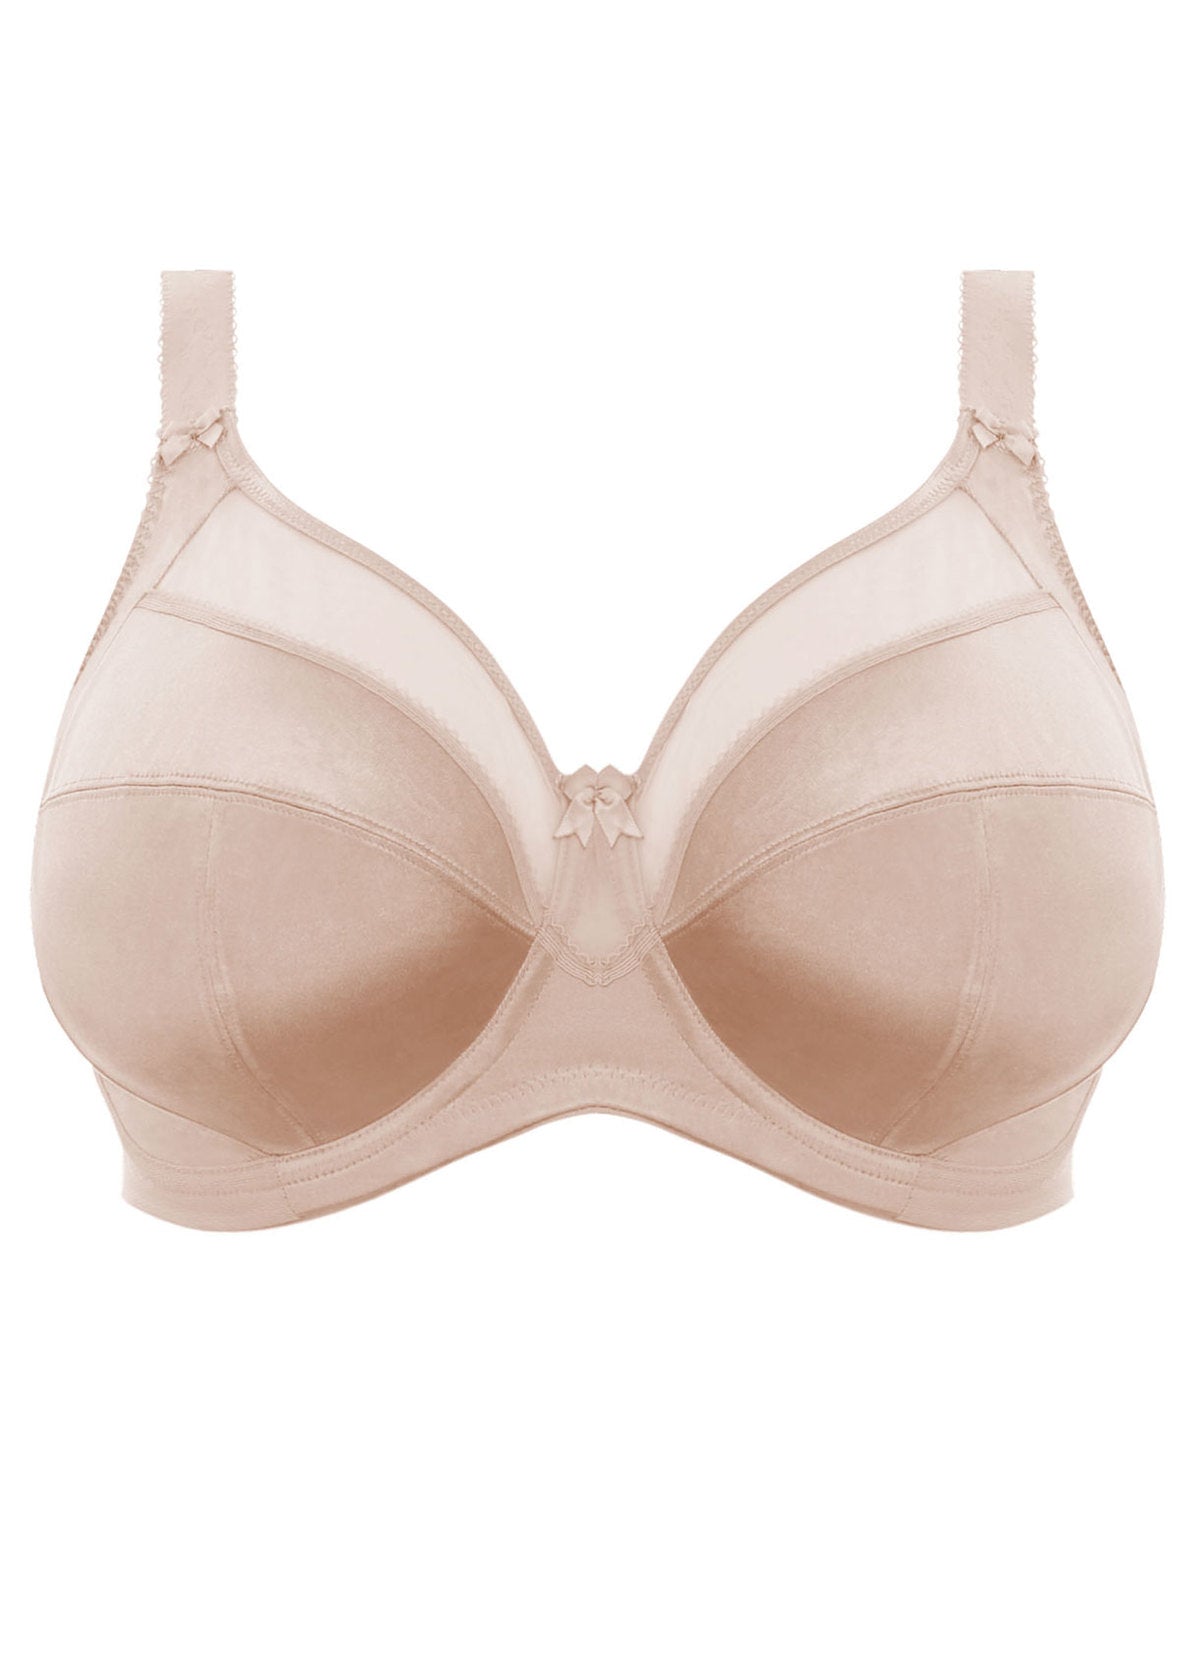 GODDESS KEIRA SOFT CUP NONWIRE BRA - FAWN